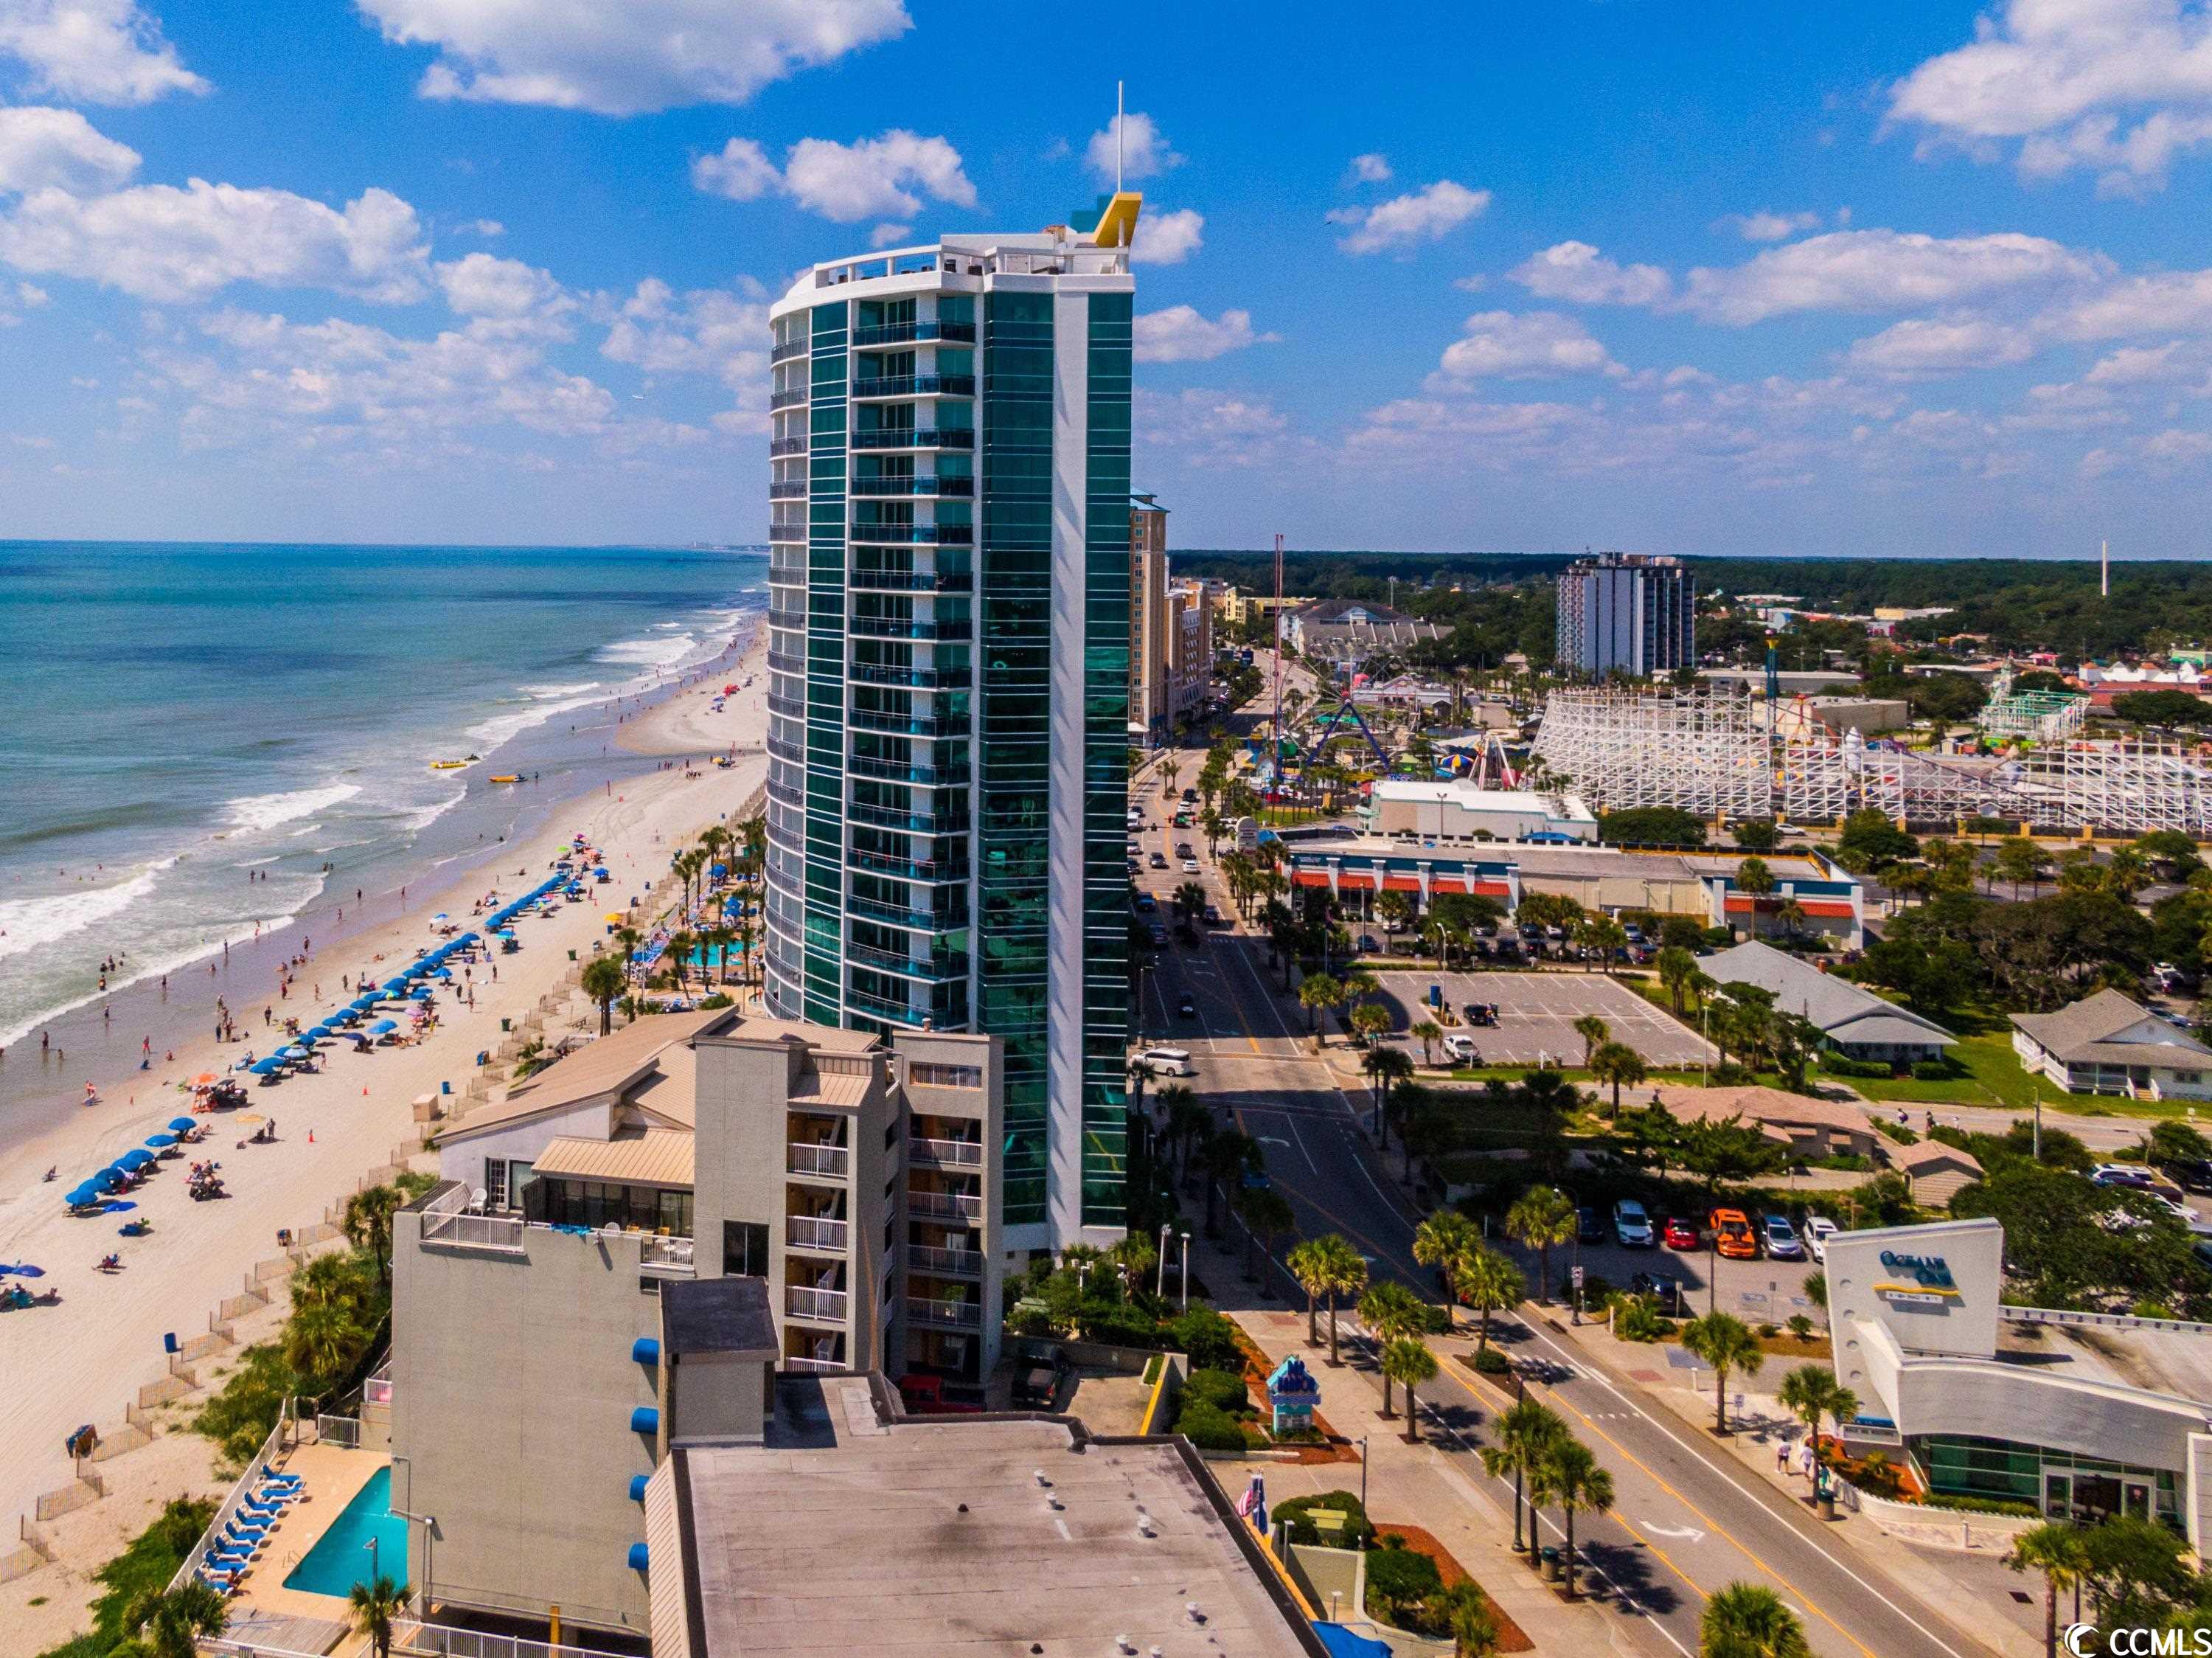 ready to own a condo with beautiful views of our southern shores? you've found the best unit for sale in this campus, oceans one, unit 704.  whether you're buying as an investment property, 2nd home, primary residence or a blend of all the above, unit 704 offers the oceanfront lifestyle you want! call today to schedule your showing. this campus includes many amenities, to name a few: lazy river, outdoor & indoor pools, sunbathing deck, outdoor cocktail lounge, indoor restaurant, fitness center, elevators and more.  this two bedroom unit is the perfect match as it comfortably sleeps up to 8 guests, comes with two full bathrooms, a full size kitchen & livingroom as well as a balcony overlooking the ocean! schedule your campus and unit tour today and place your offer to purchase your coastal condo!